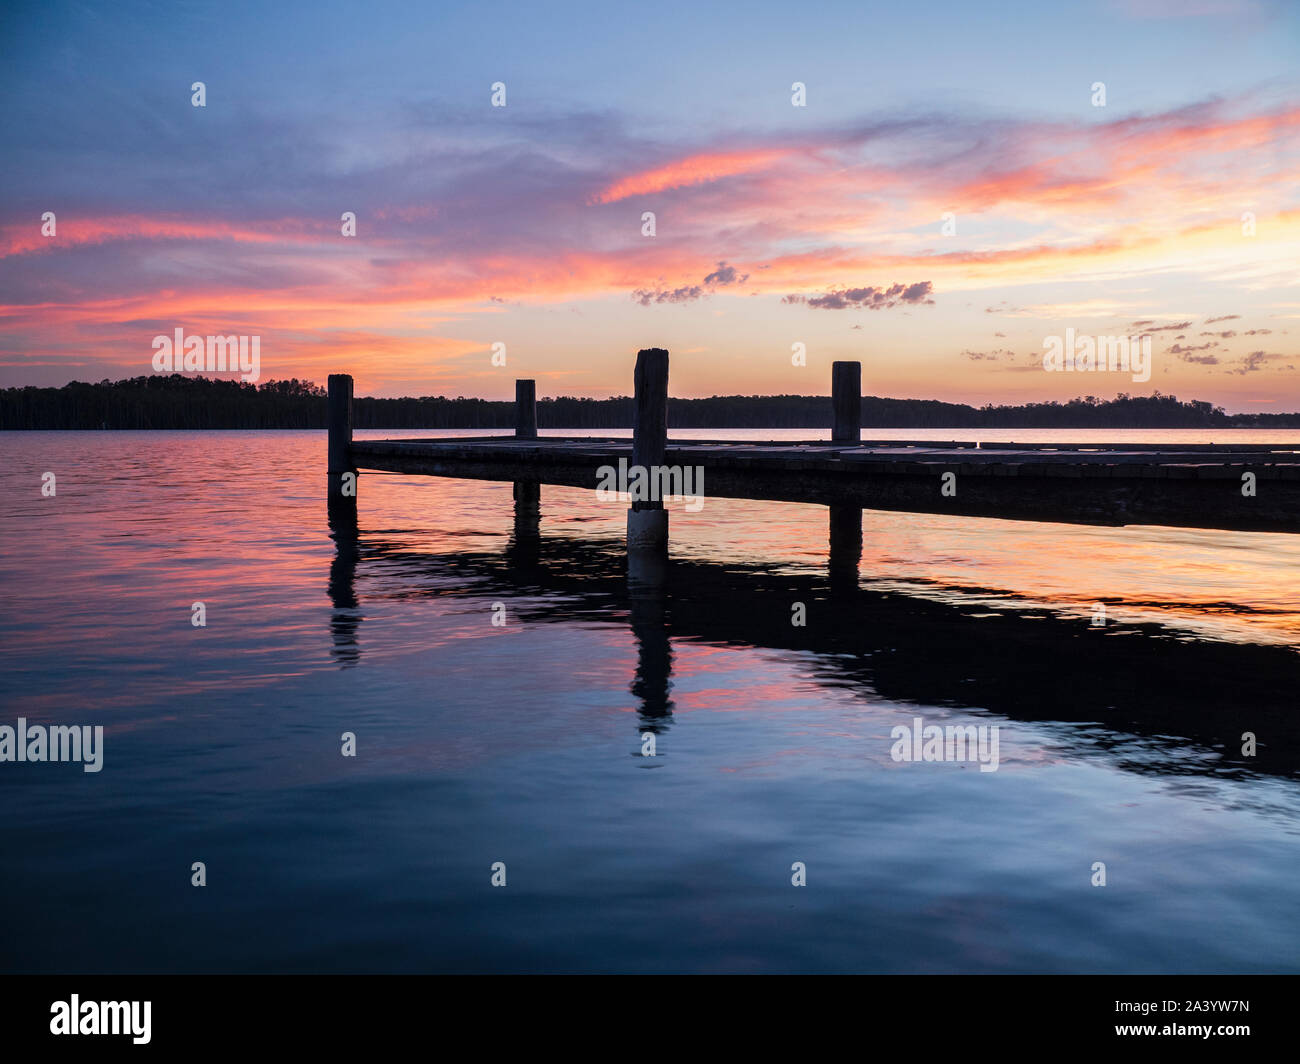 Jetty on river at sunset Stock Photo